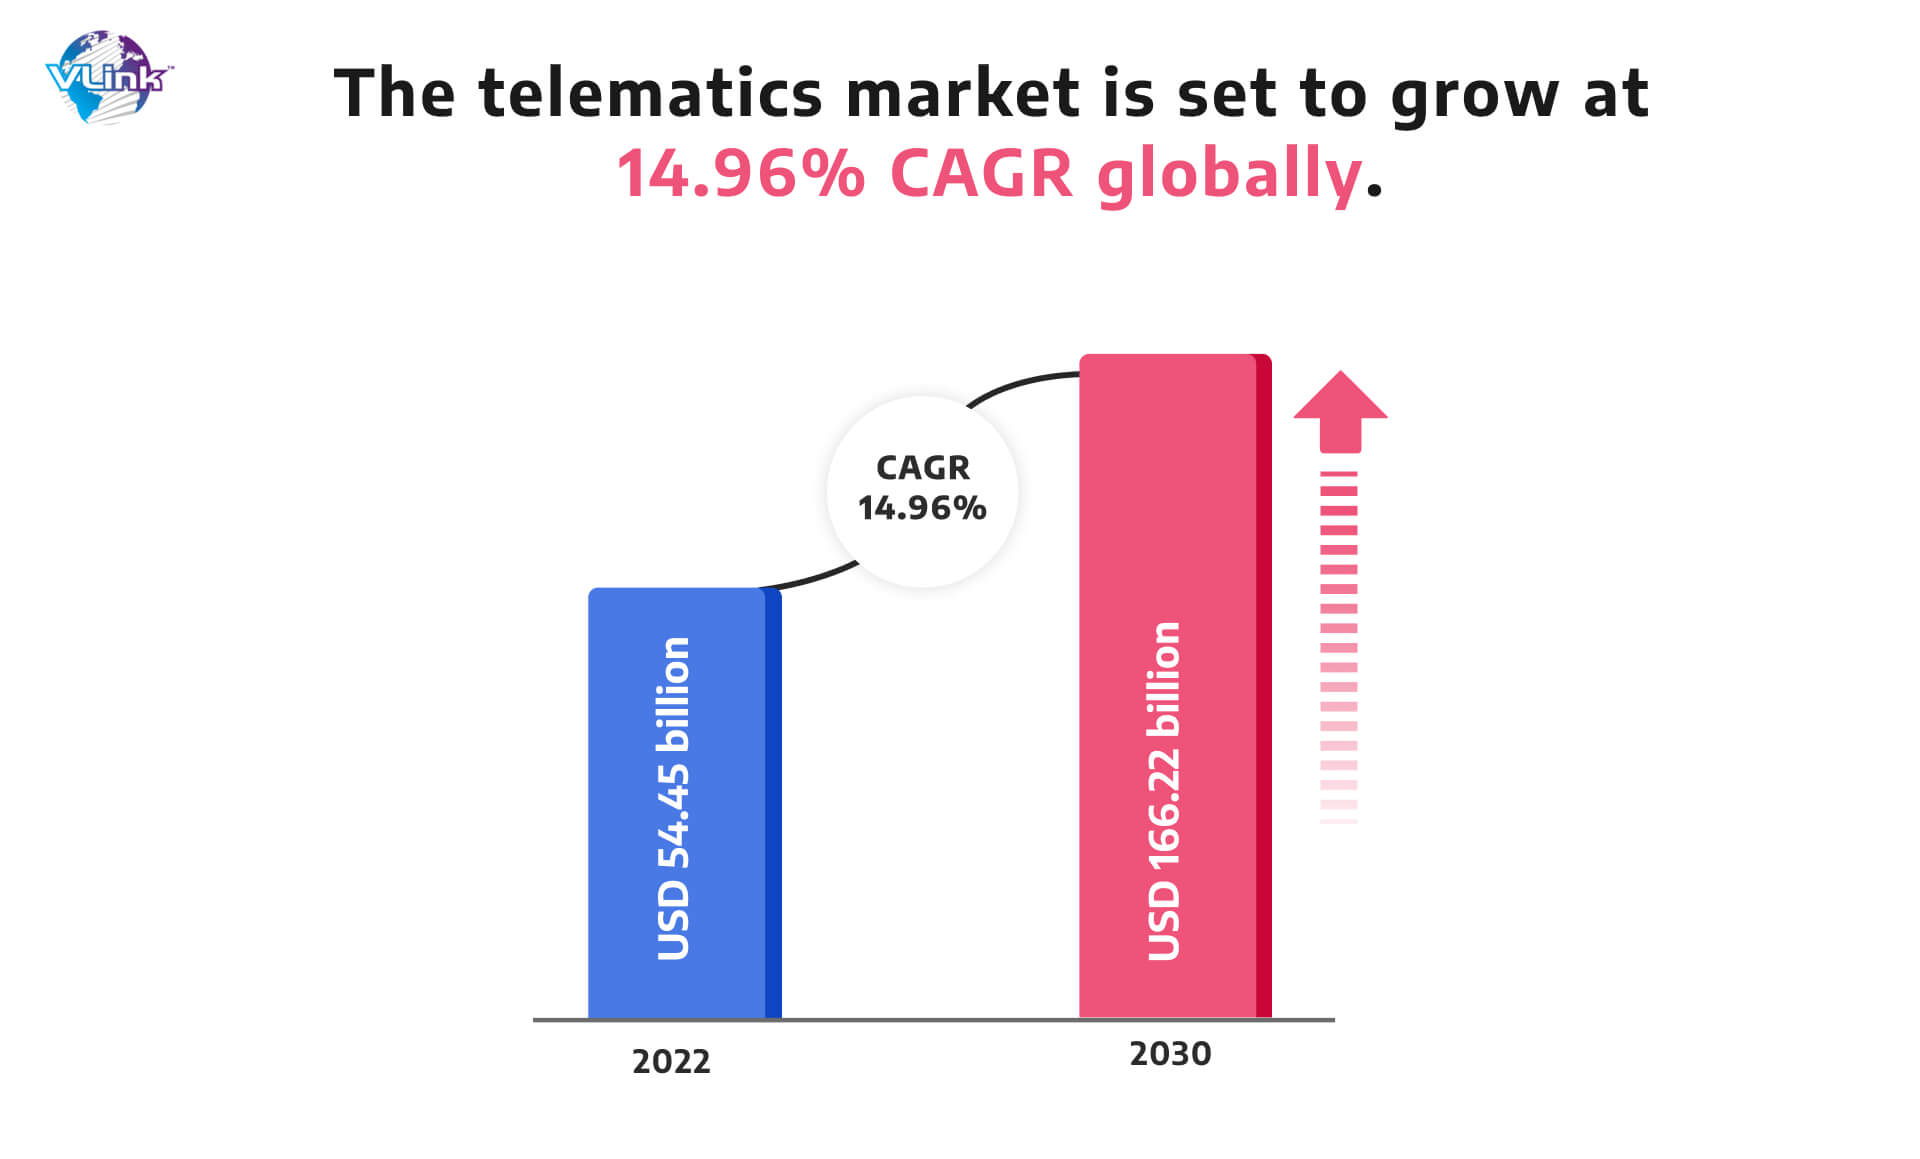 The Telematics market is set to grow at 14.96% CAGR globally.